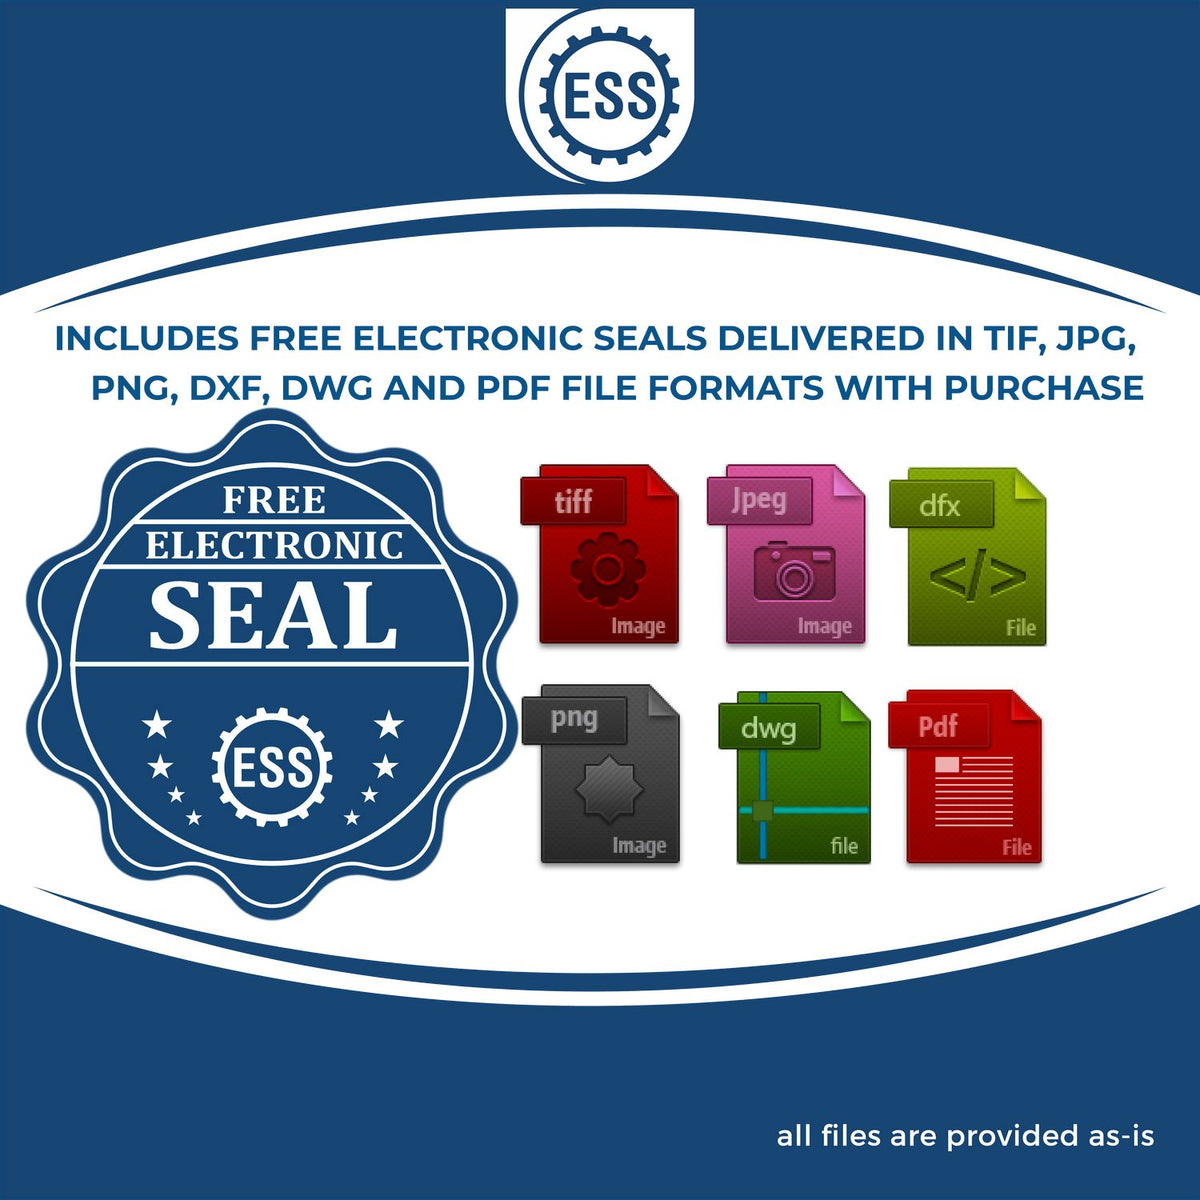 An infographic for the free electronic seal for the Slim Pre-Inked Tennessee Professional Engineer Seal Stamp illustrating the different file type icons such as DXF, DWG, TIF, JPG and PNG.